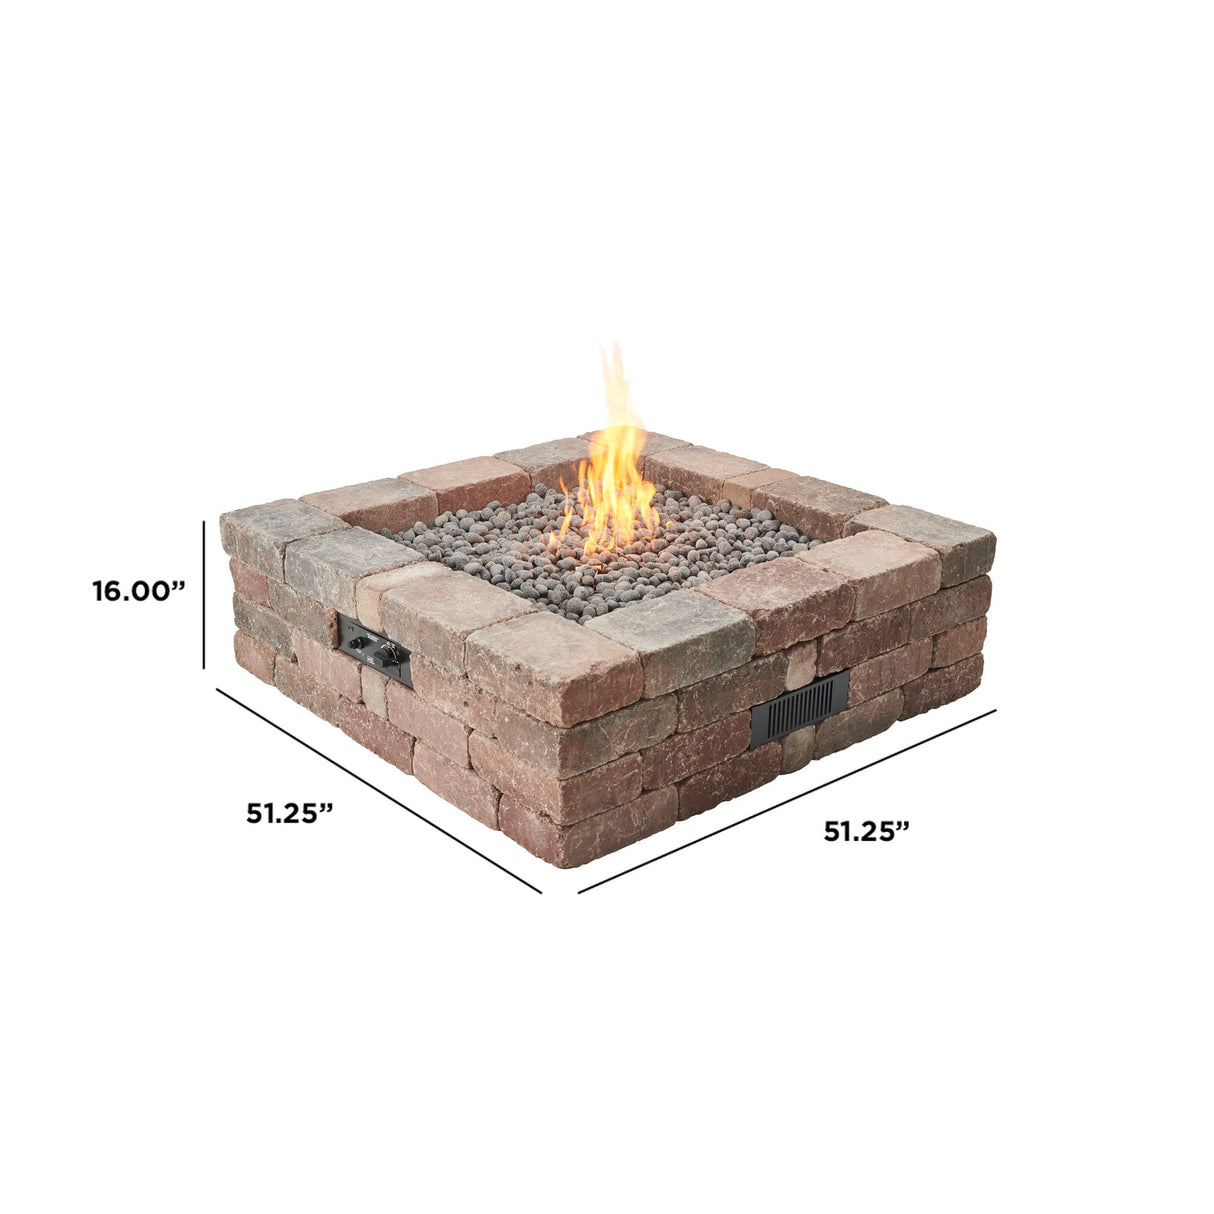 Dimensions overlaid on the Bronson Block Square Gas Fire Pit Kit